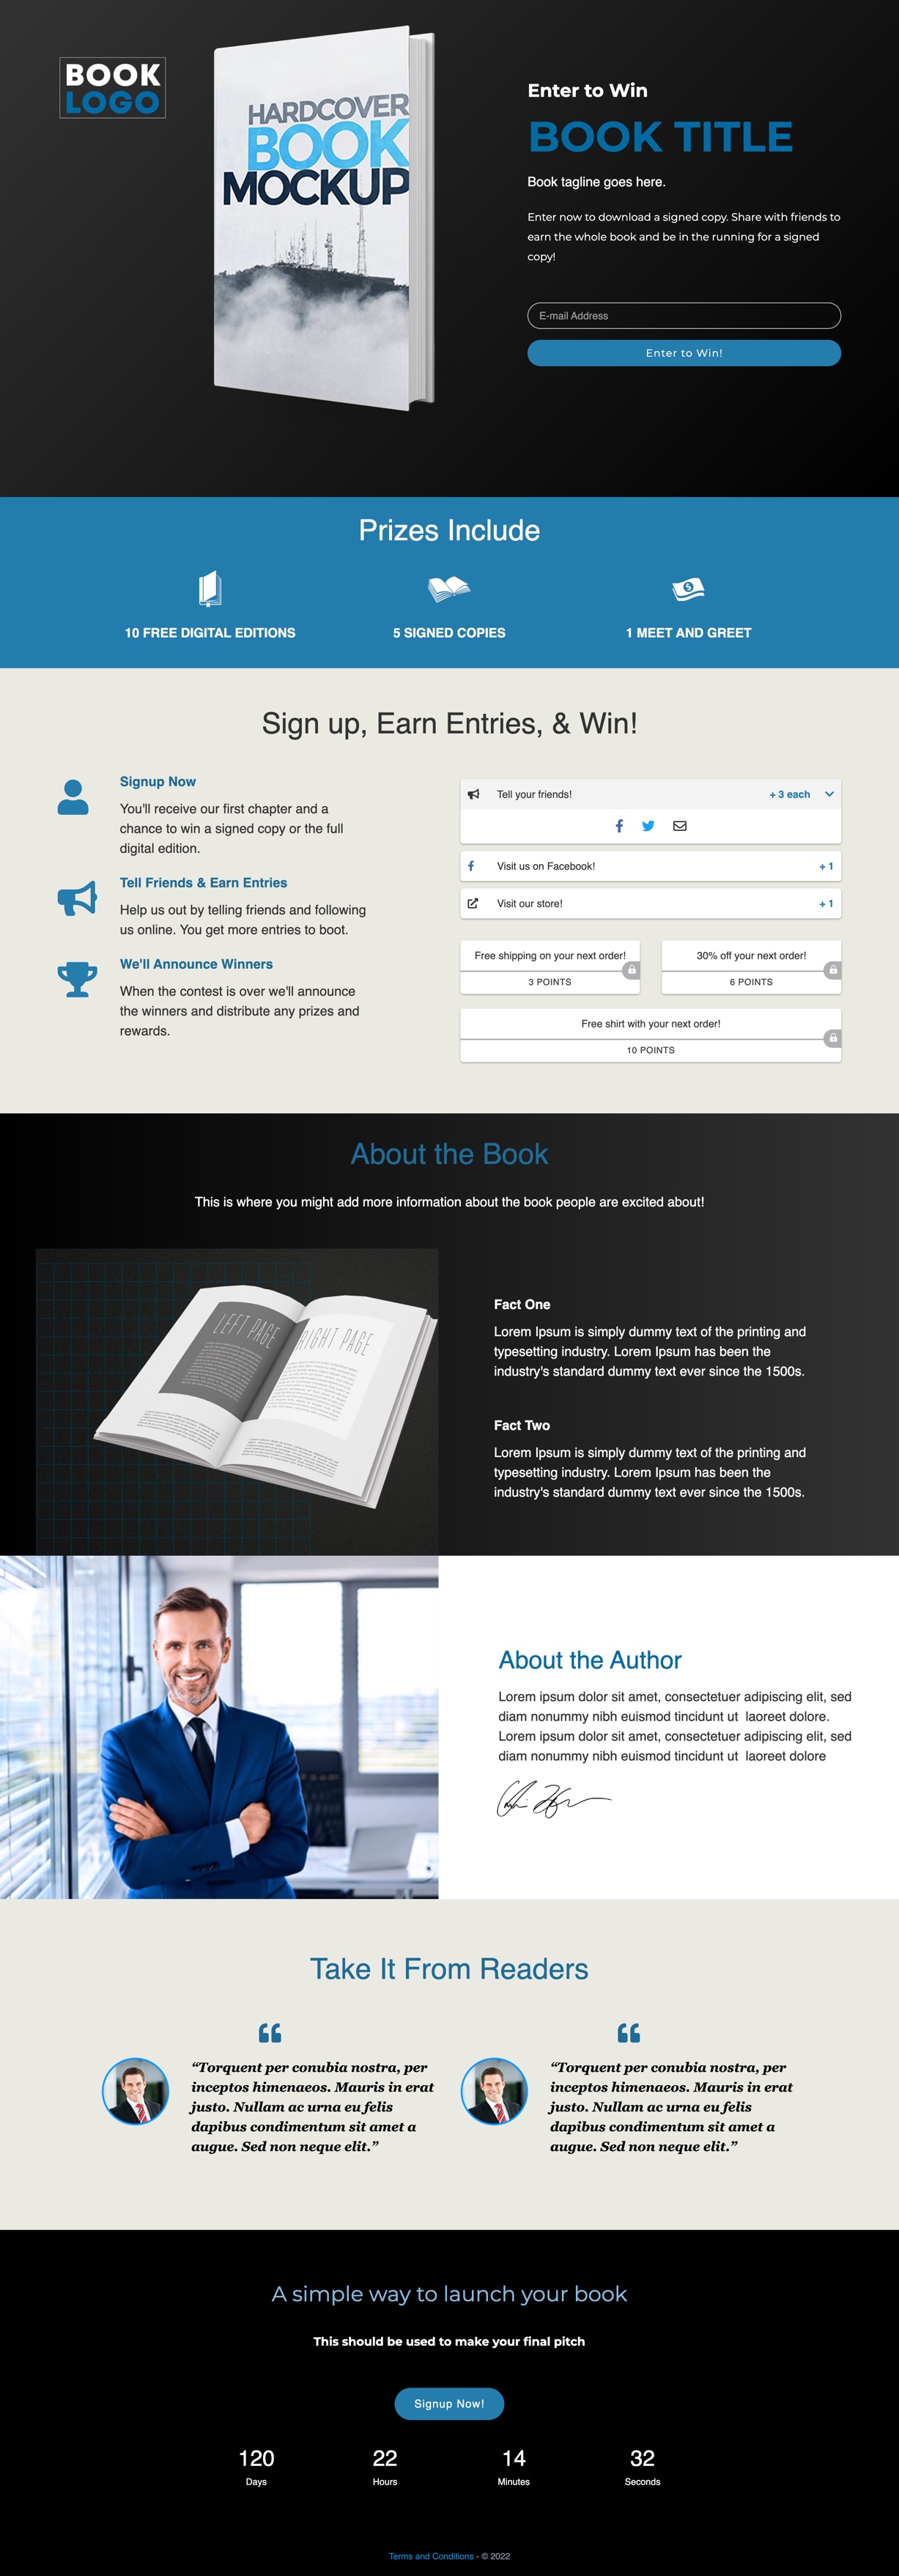 Landing Page Template: Enter to Win Book Launch Contest - Dark Mode - Contest